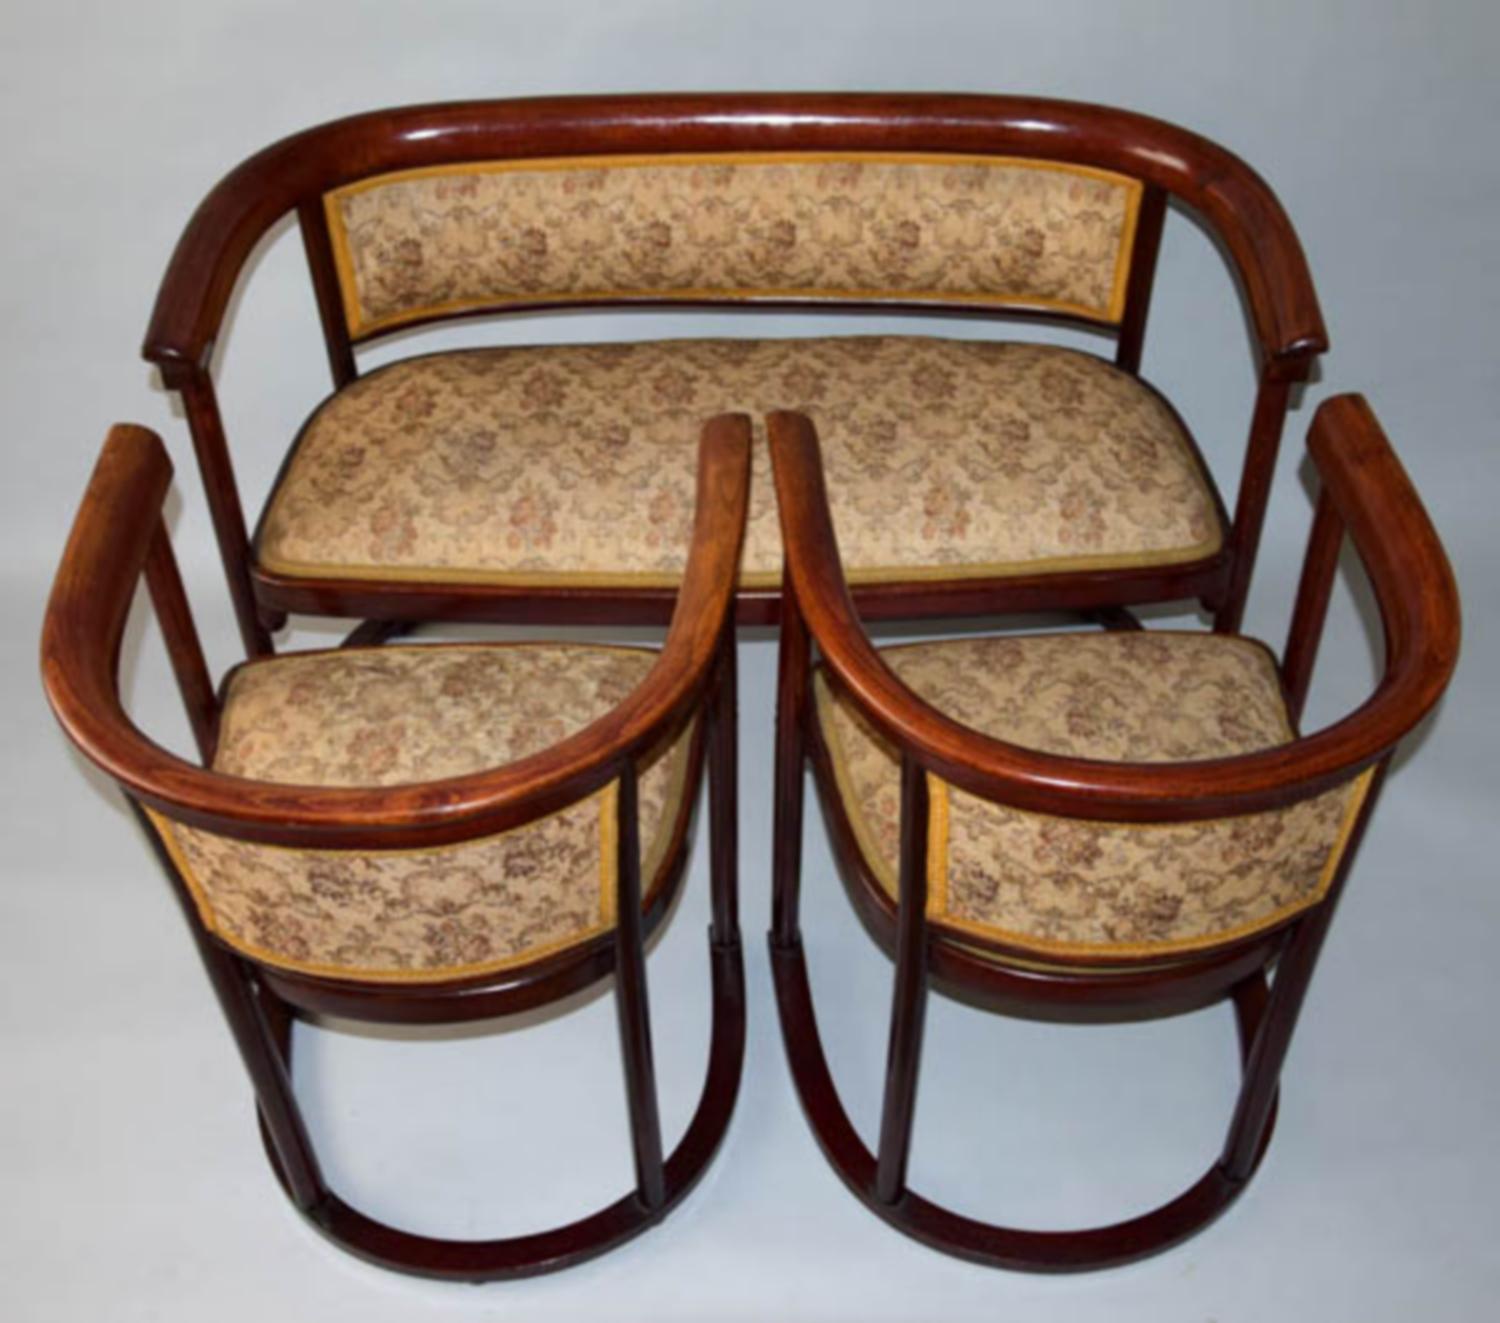 - Good original condition
- Good fabric upholstery (not original from factory, probably reupholstered some time ago) included springs
- No need any restoration
- All pieces stamped by Thonet
- Originally designed for Fledermaus cabaret in